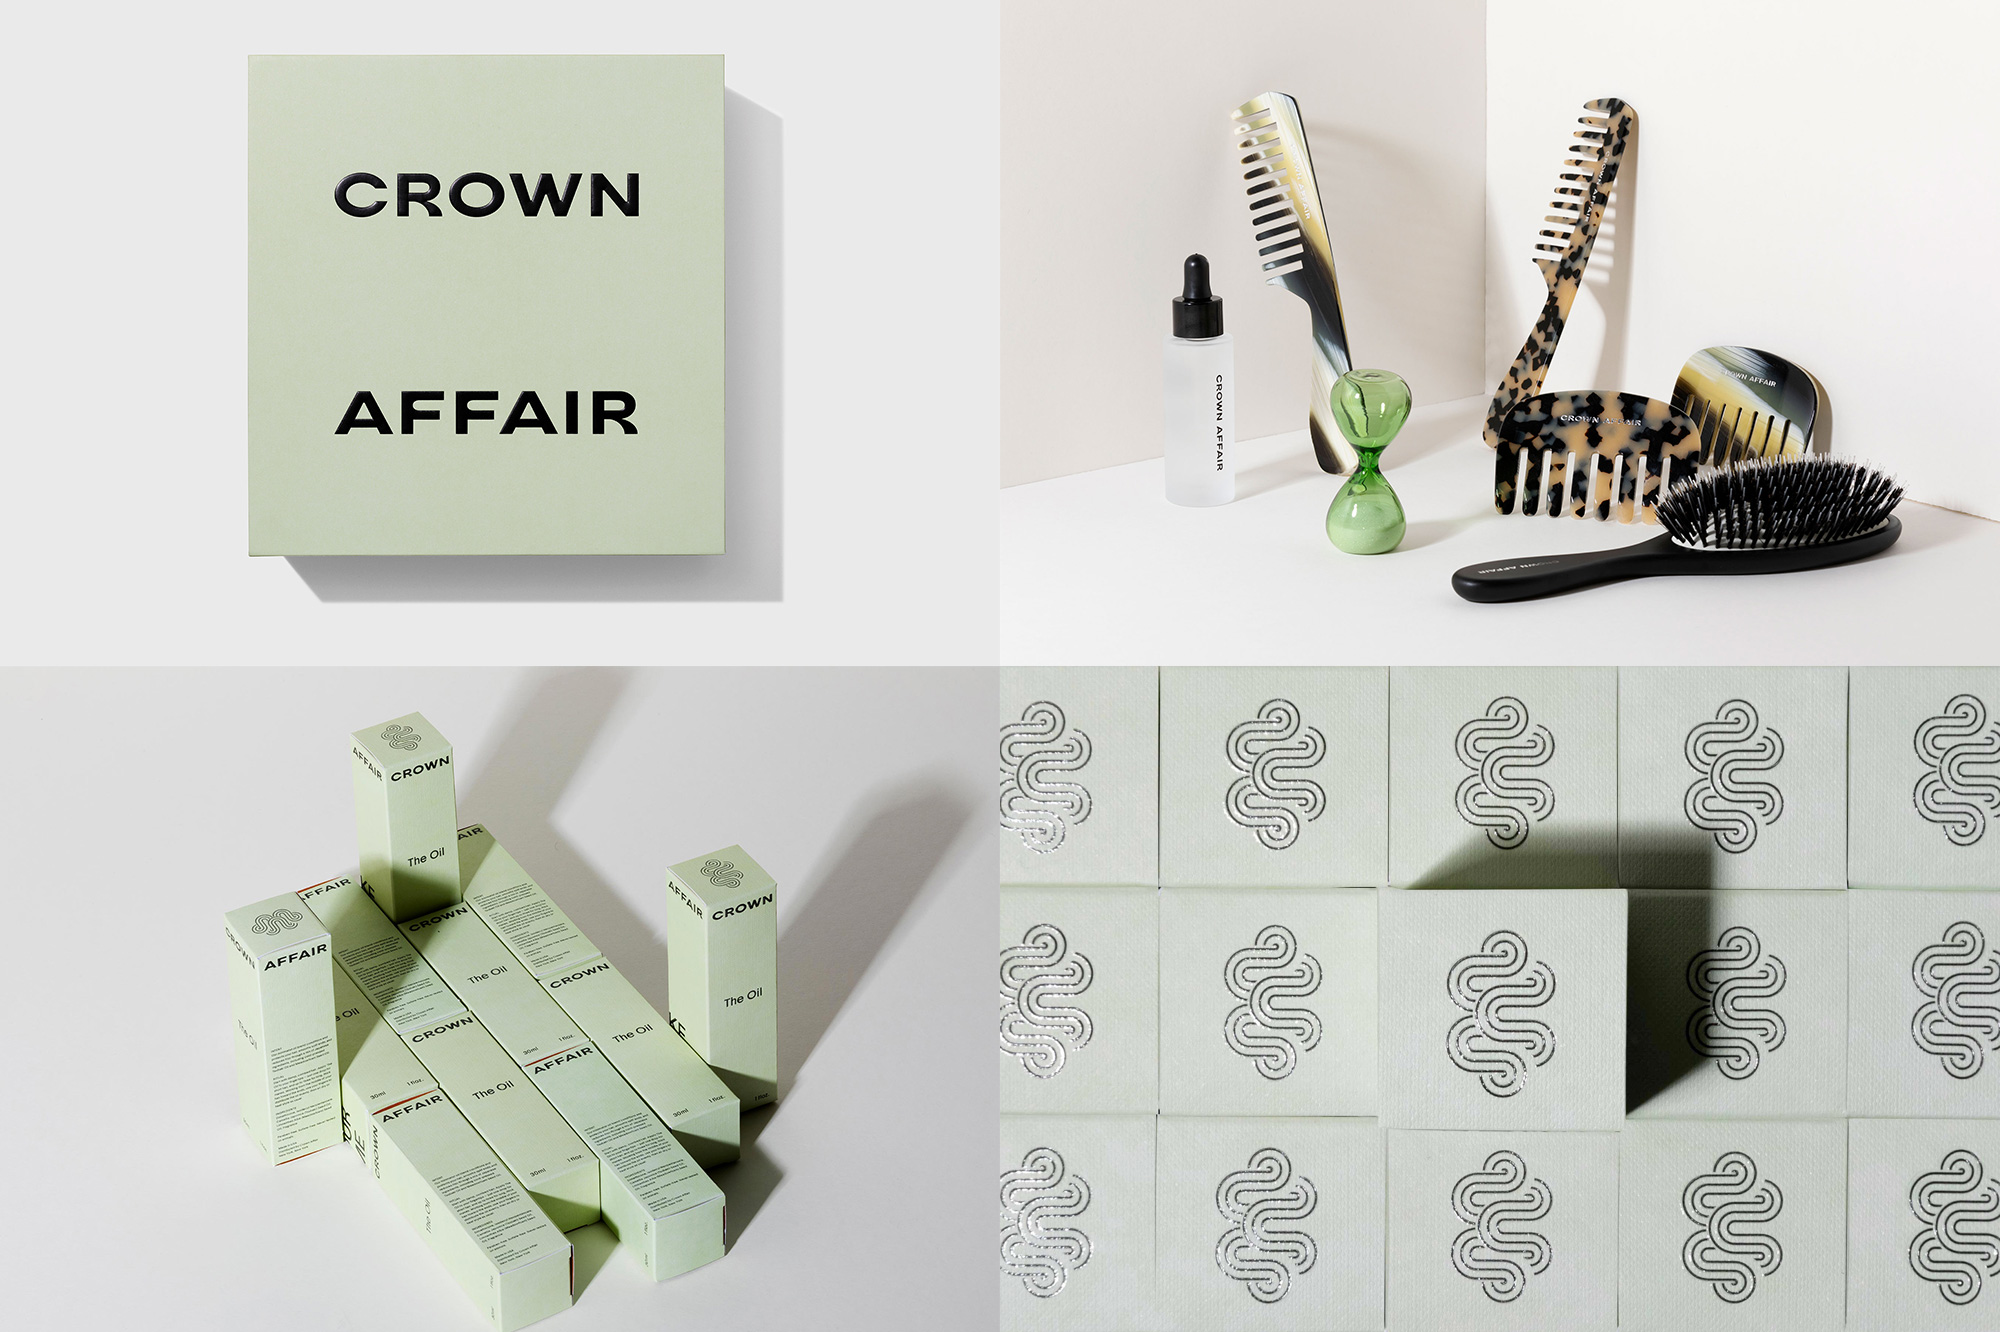 Crown Affair by Placeholder